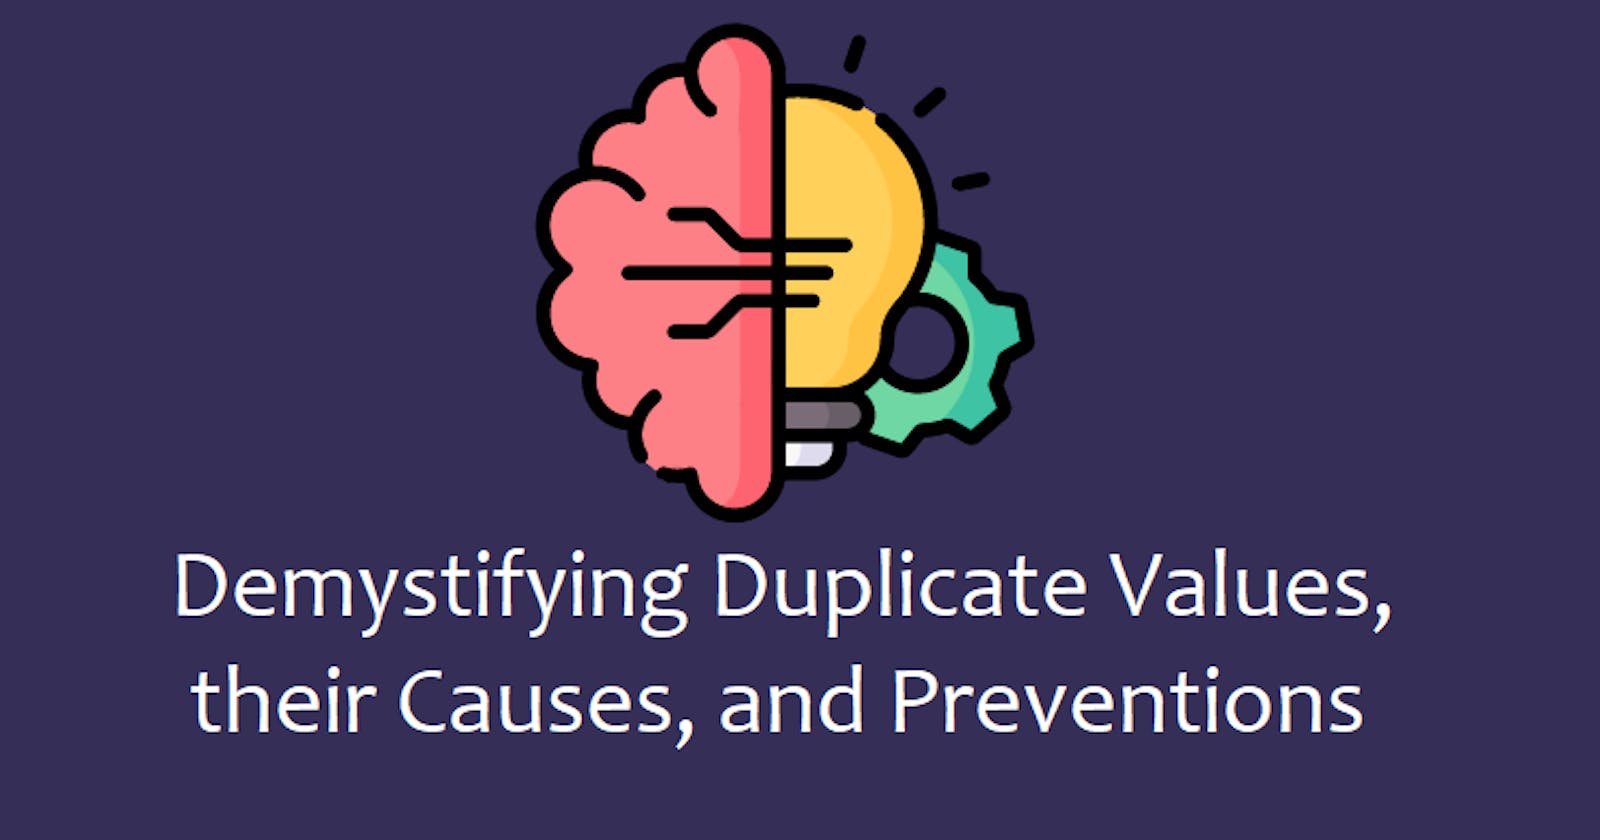 Demystifying Duplicate Values, their Causes, and Preventions